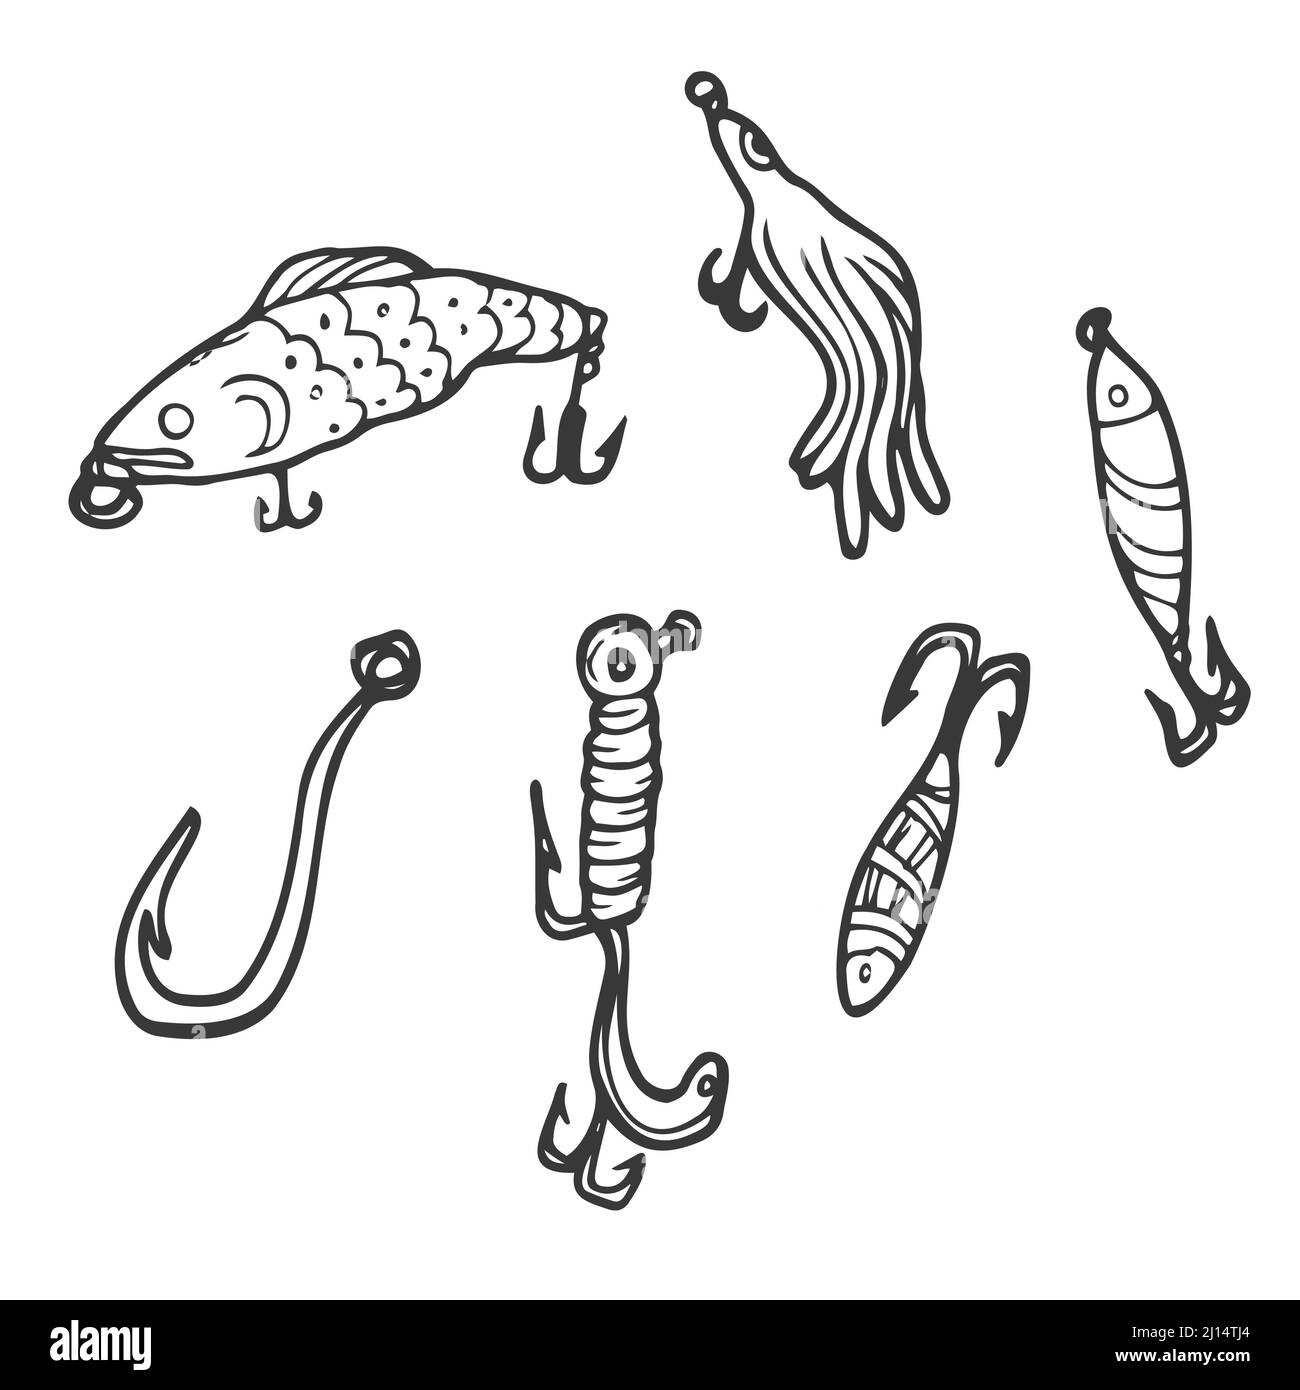 Doodle fishing lure. Abstract contemporary fishery baits of different sizes and shapes for angler. Colored hand drawn fisher accessories with hooks. Stock Vector